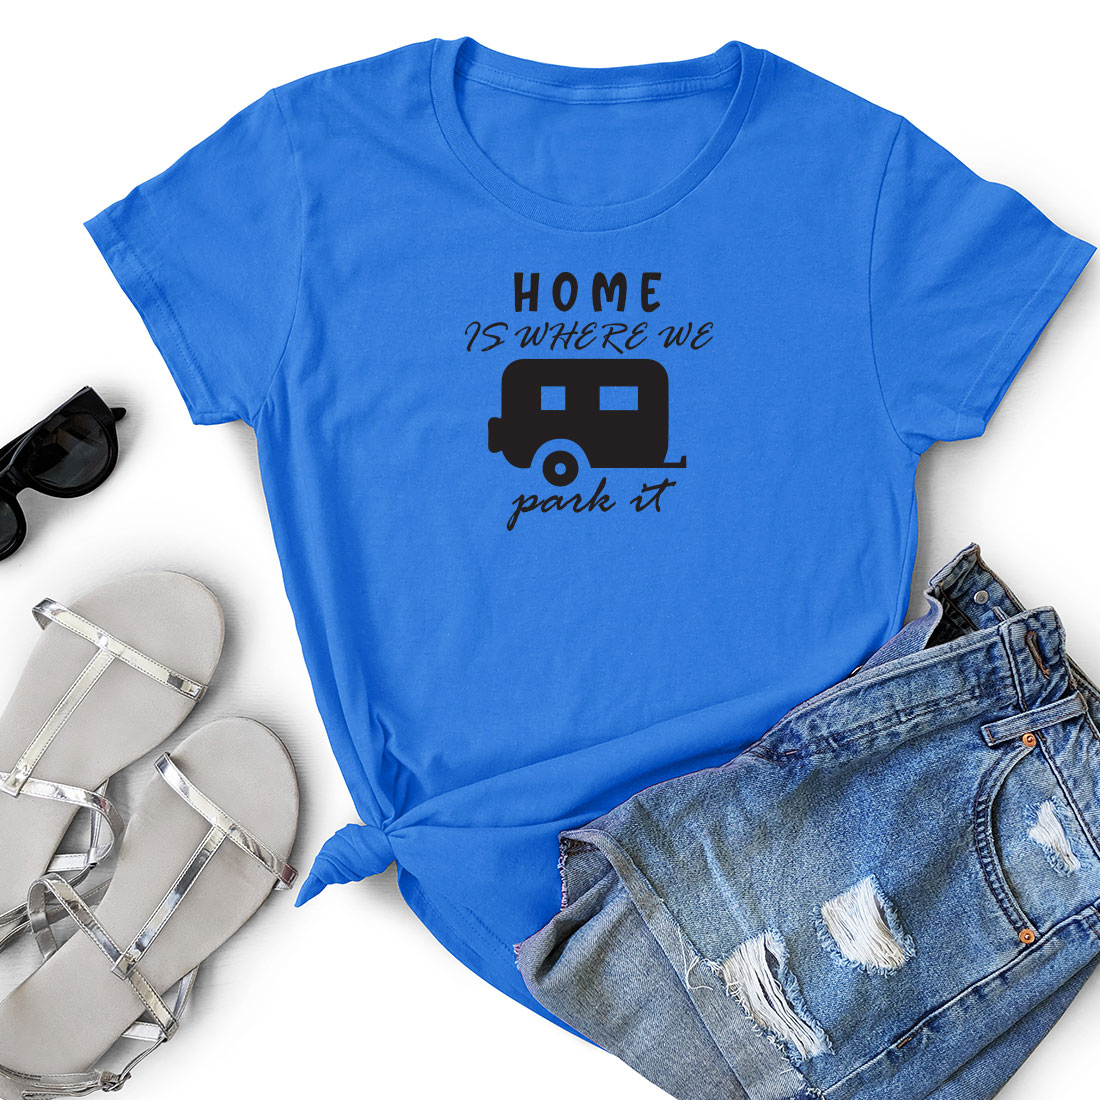 T - shirt that says home is where the people at.